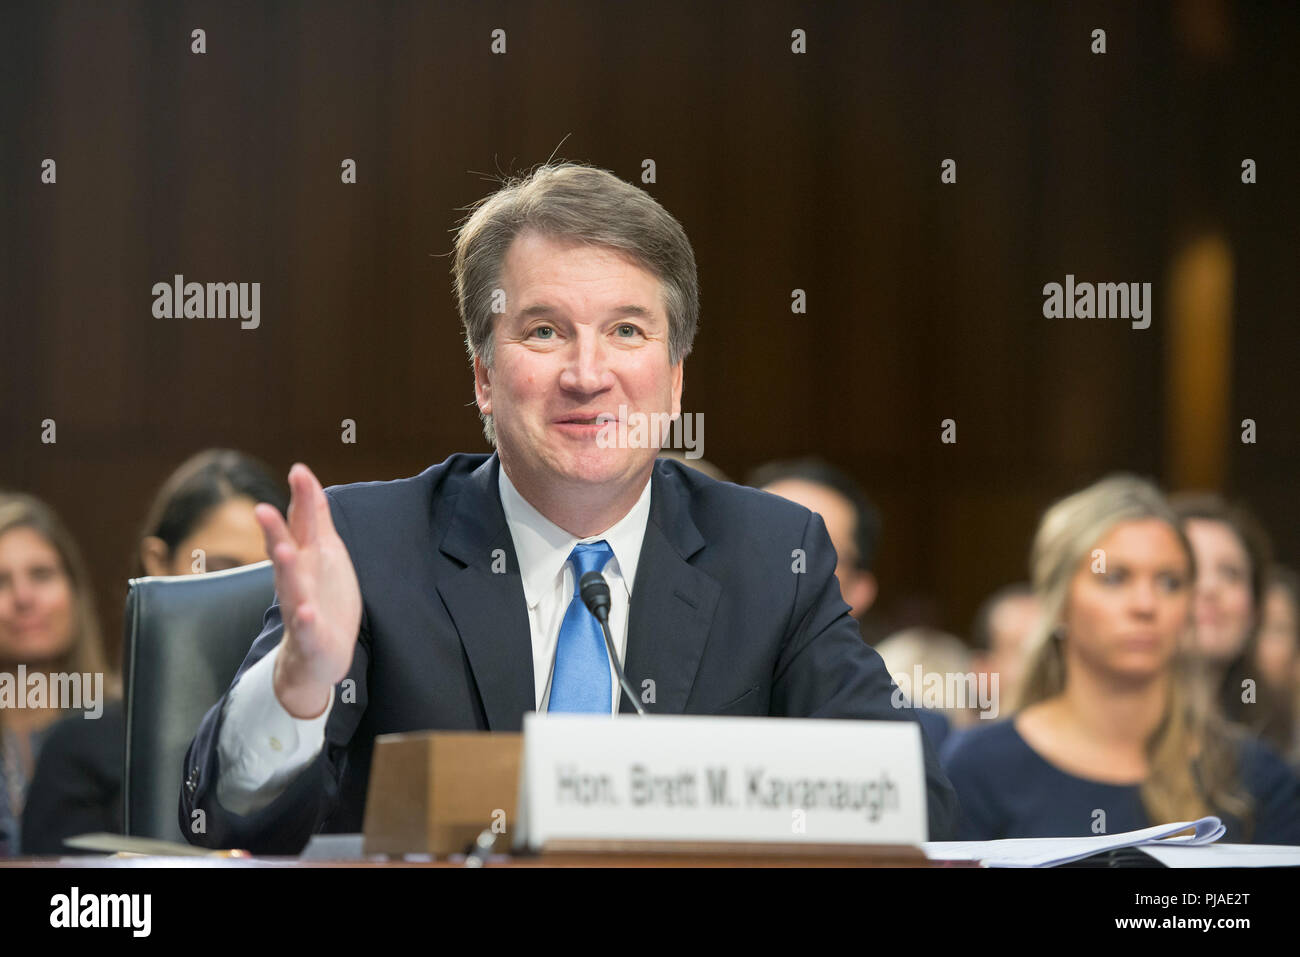 Washington DC, September 5, 2018, USA: Judge Brett Kavanaugh attends his confirmation hearing to become the next Supreme Court Justice on Capitol Hill in Washington DC. Patsy Lynch/MediaPunch Stock Photo